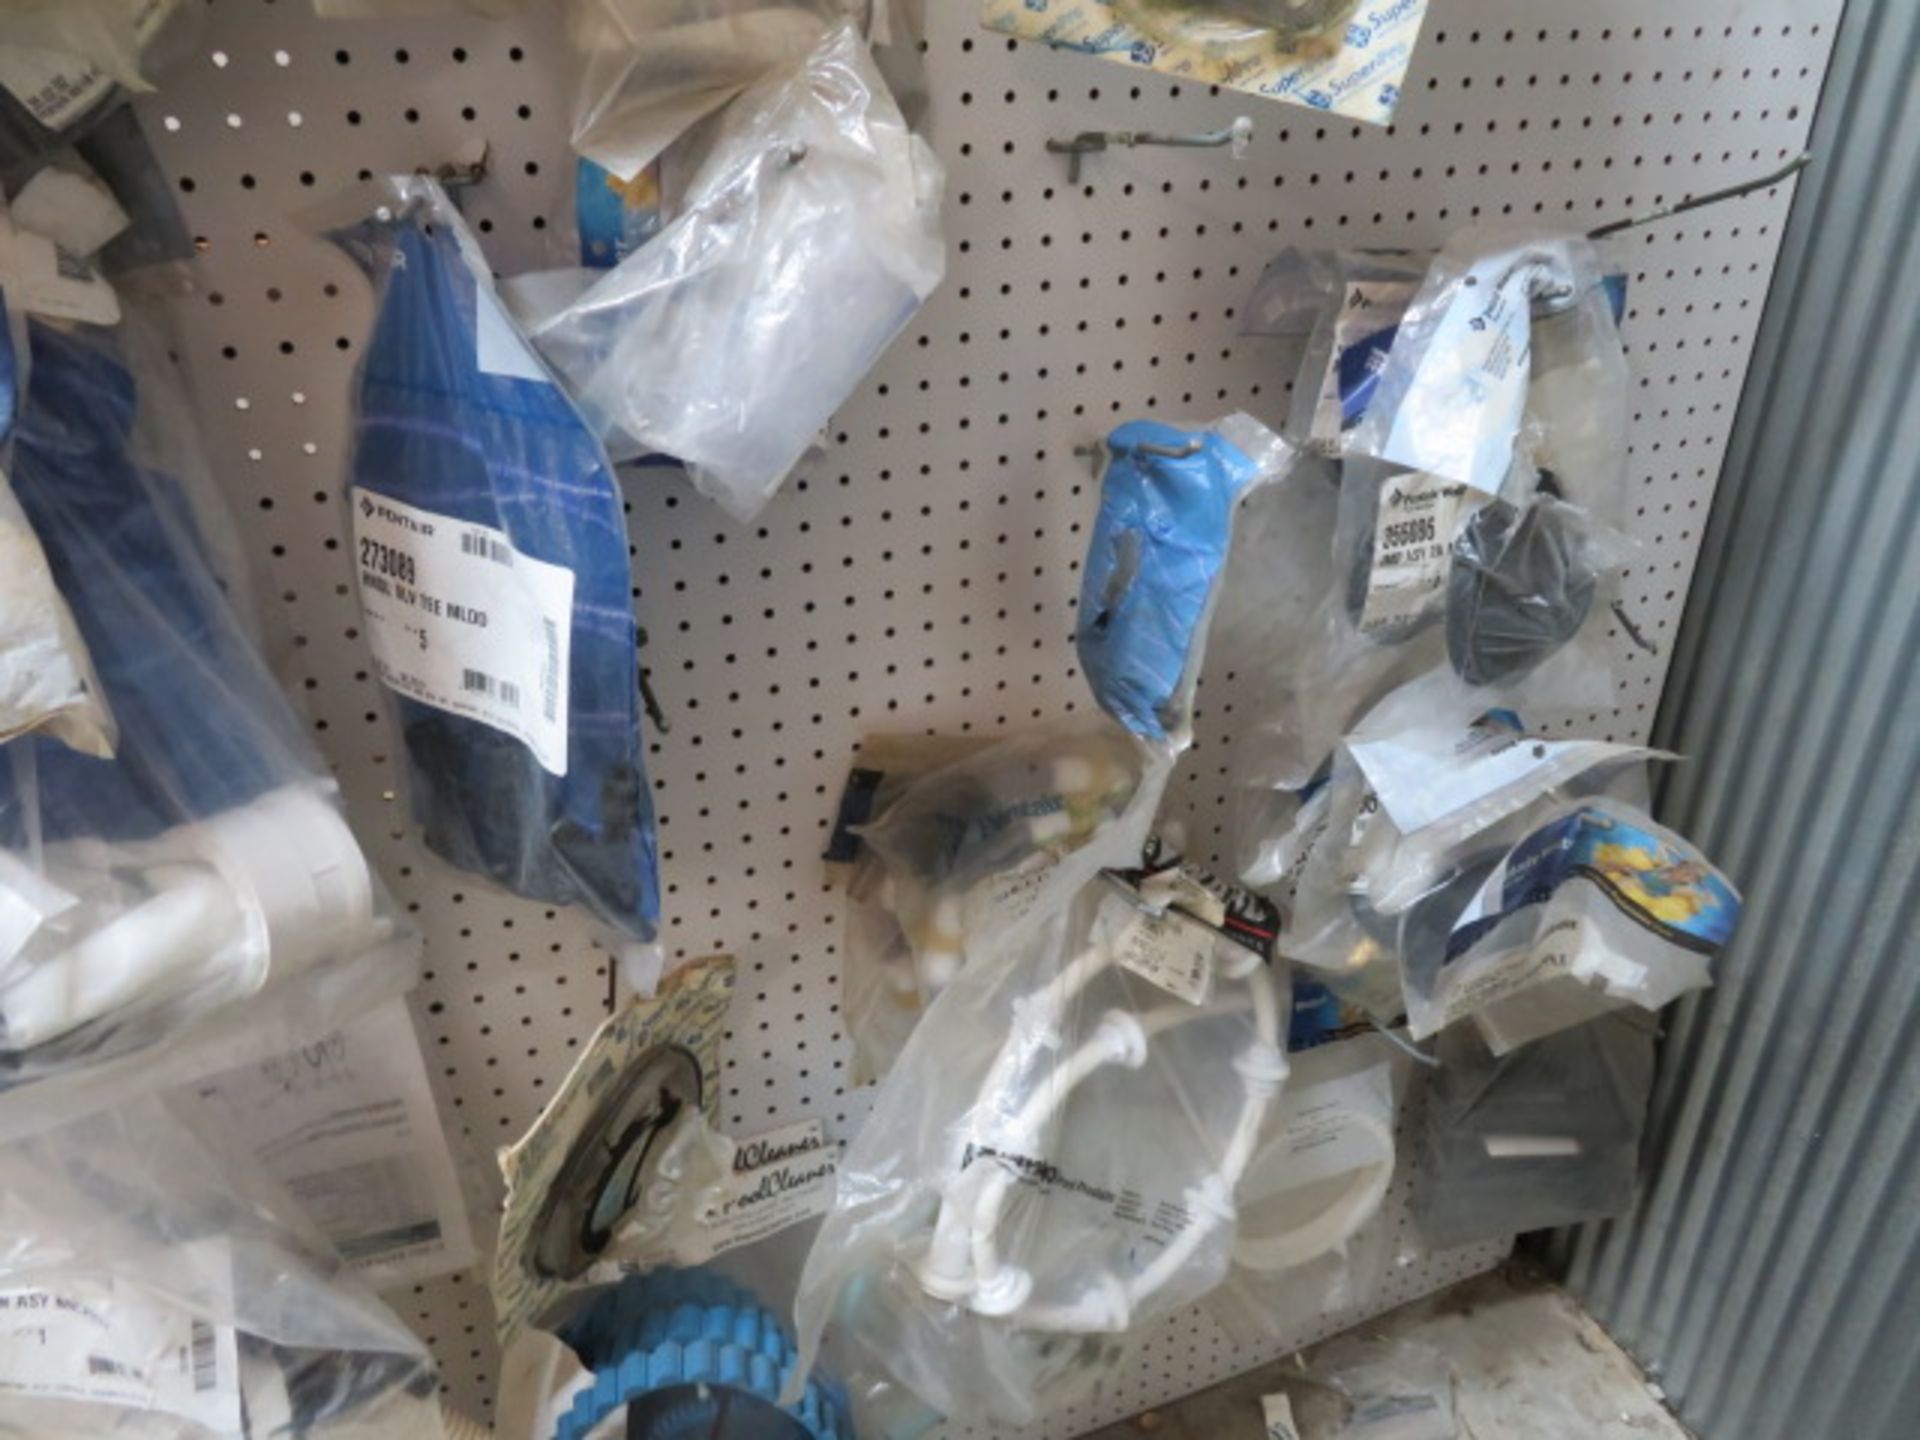 LOT CONSISTING OF: pool sweep, filter parts, pump parts, table chlorinator parts, assorted - Image 17 of 17